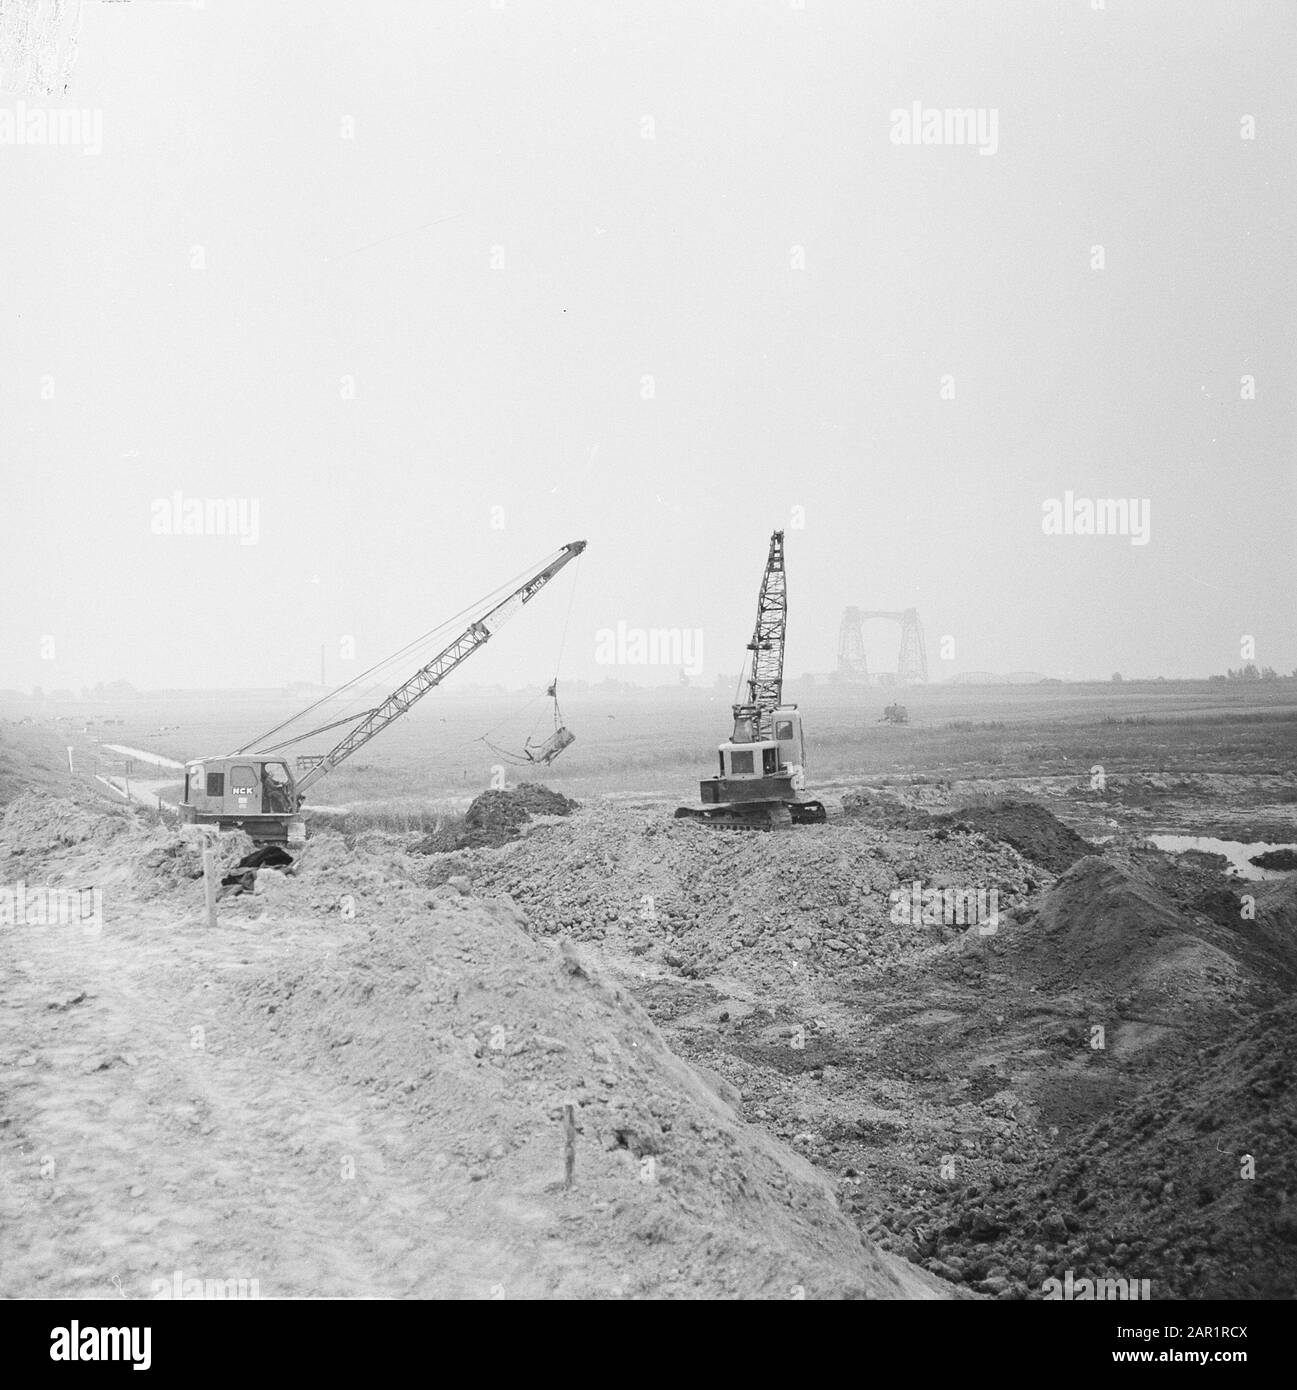 Excavation works at Barendrecht, construction pit for tunnel under the Oude Maas Date: 4 July 1966 Location: Barendrecht, Meuse Keywords: construction wells, excavation works, tunnels Stock Photo